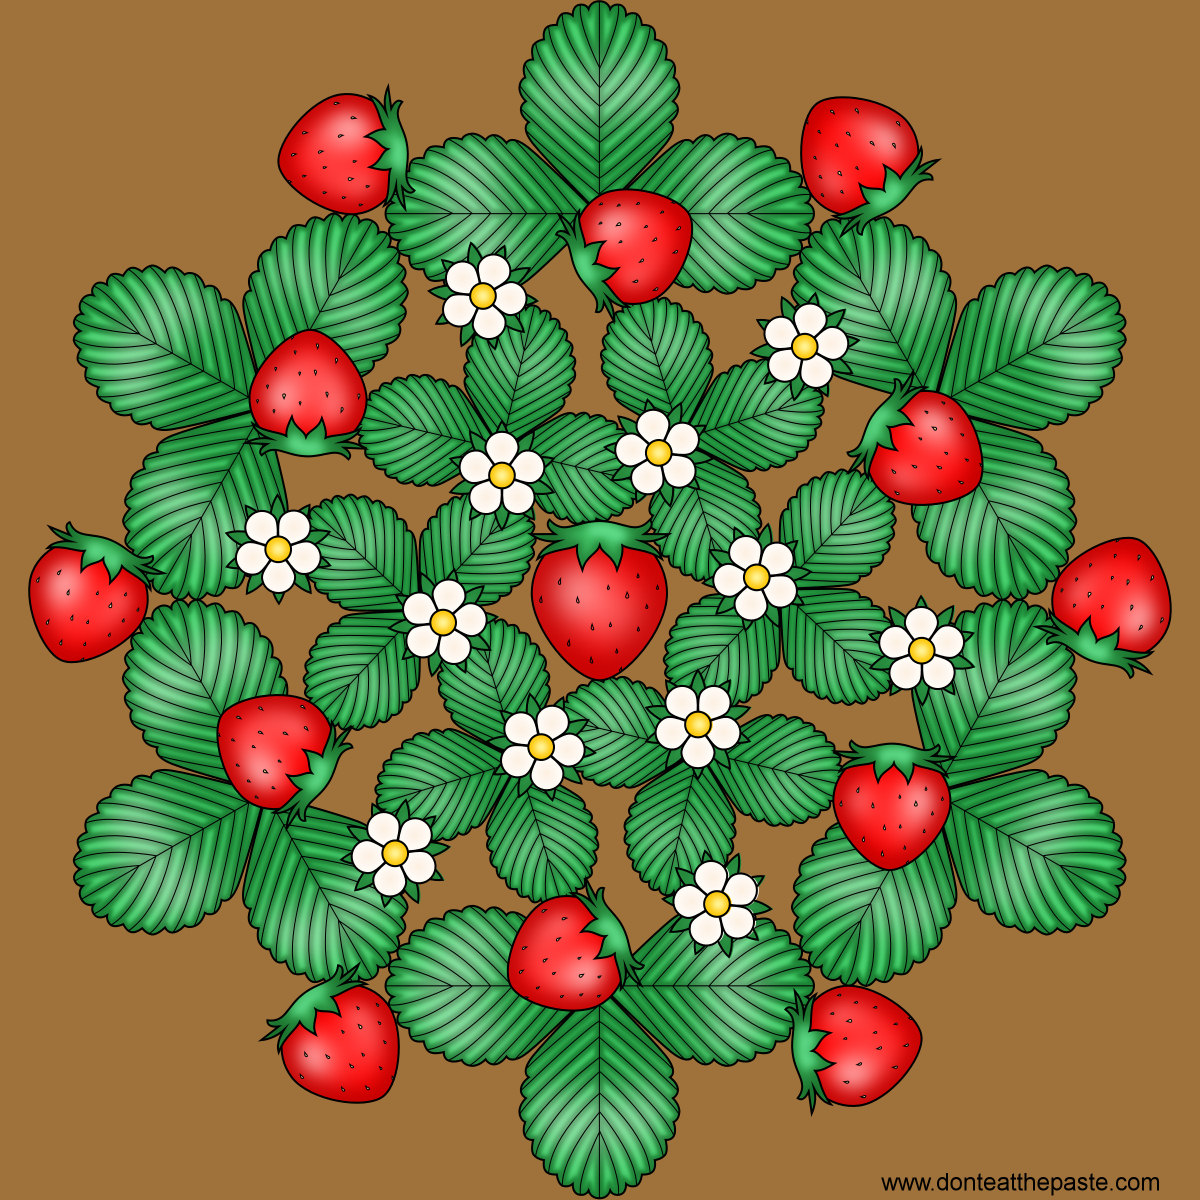 Strawberry mandala- with a blank version to color